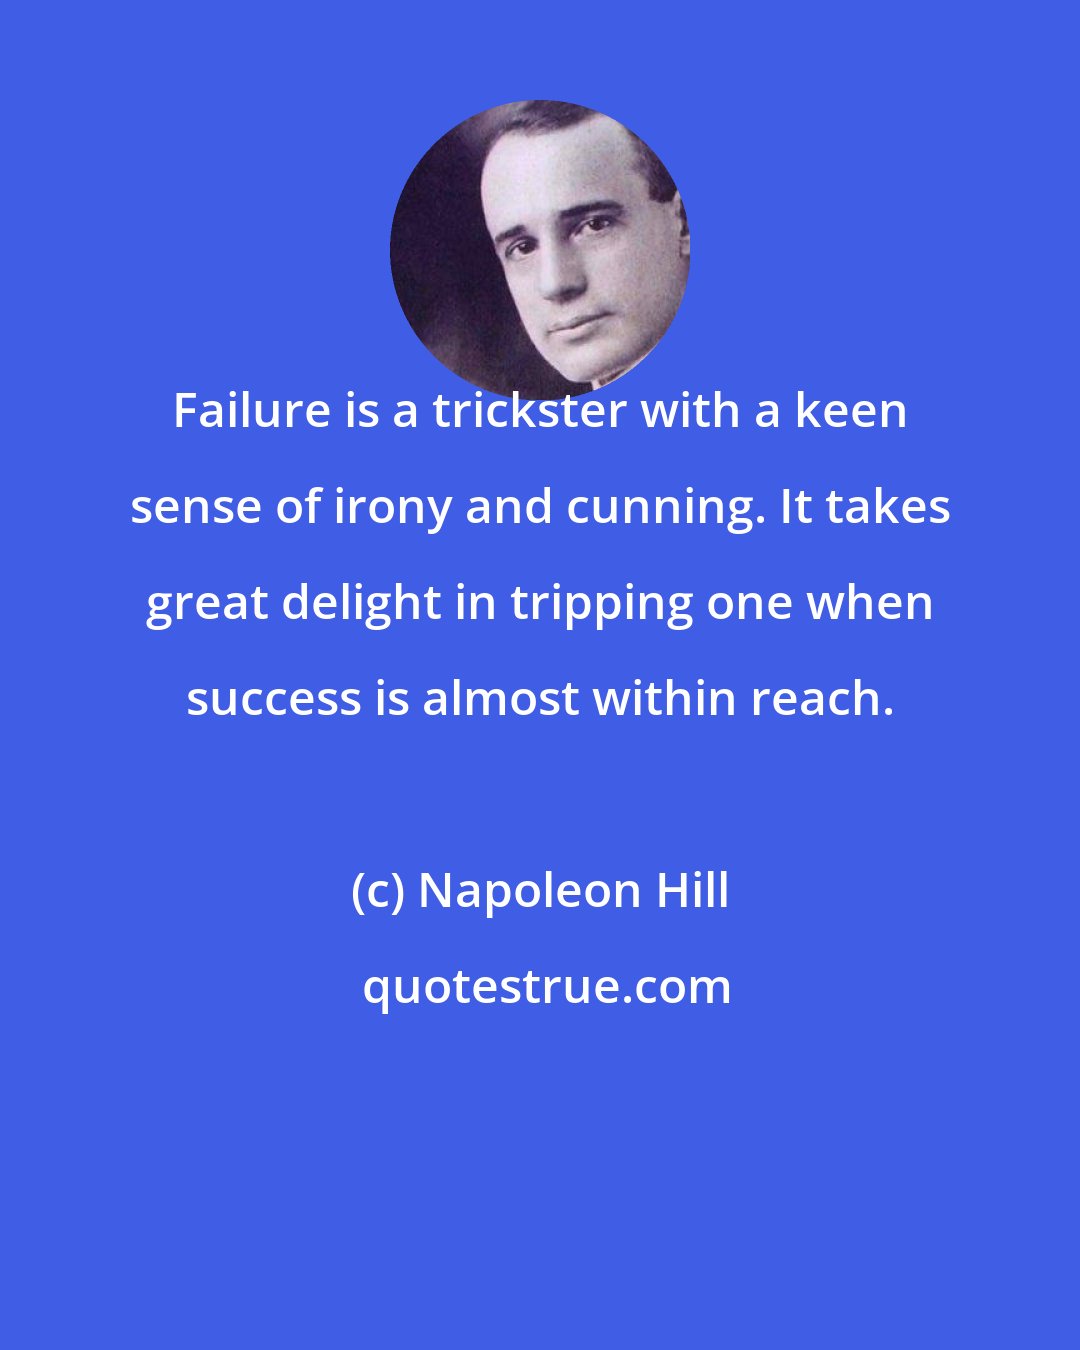 Napoleon Hill: Failure is a trickster with a keen sense of irony and cunning. It takes great delight in tripping one when success is almost within reach.